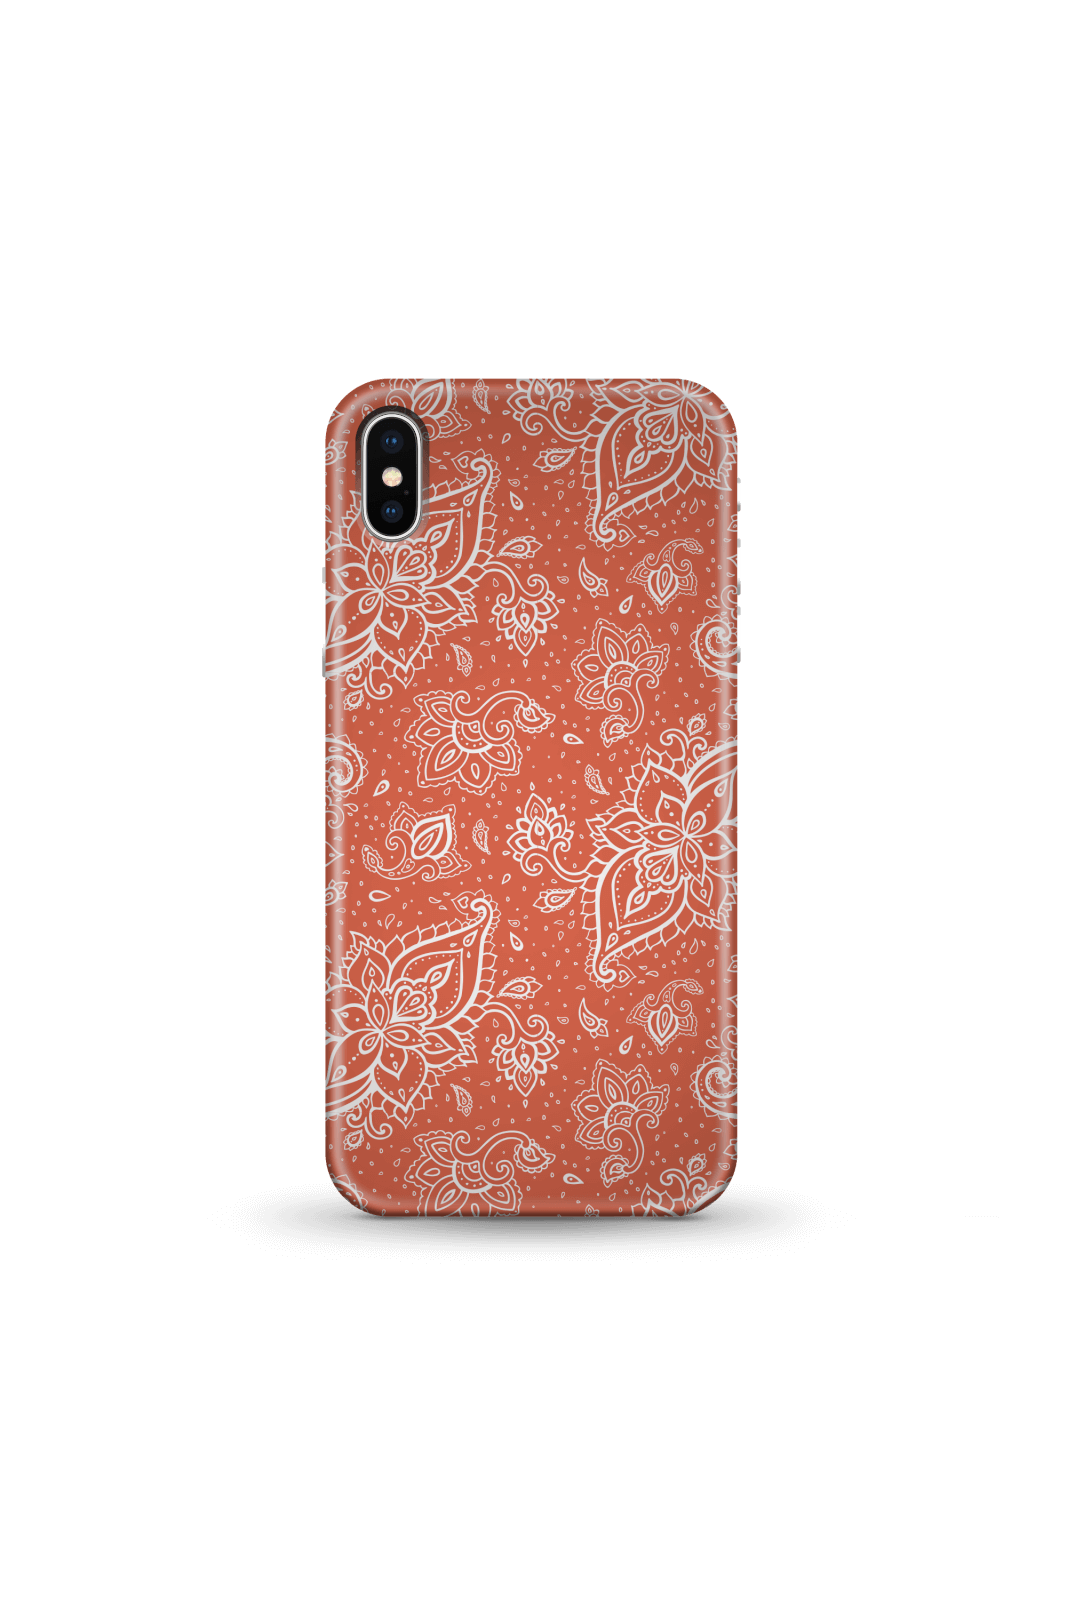 Orange Paisley Phone Case for iPhone and Android - iPhone 5/5s - Snap Case - Matte